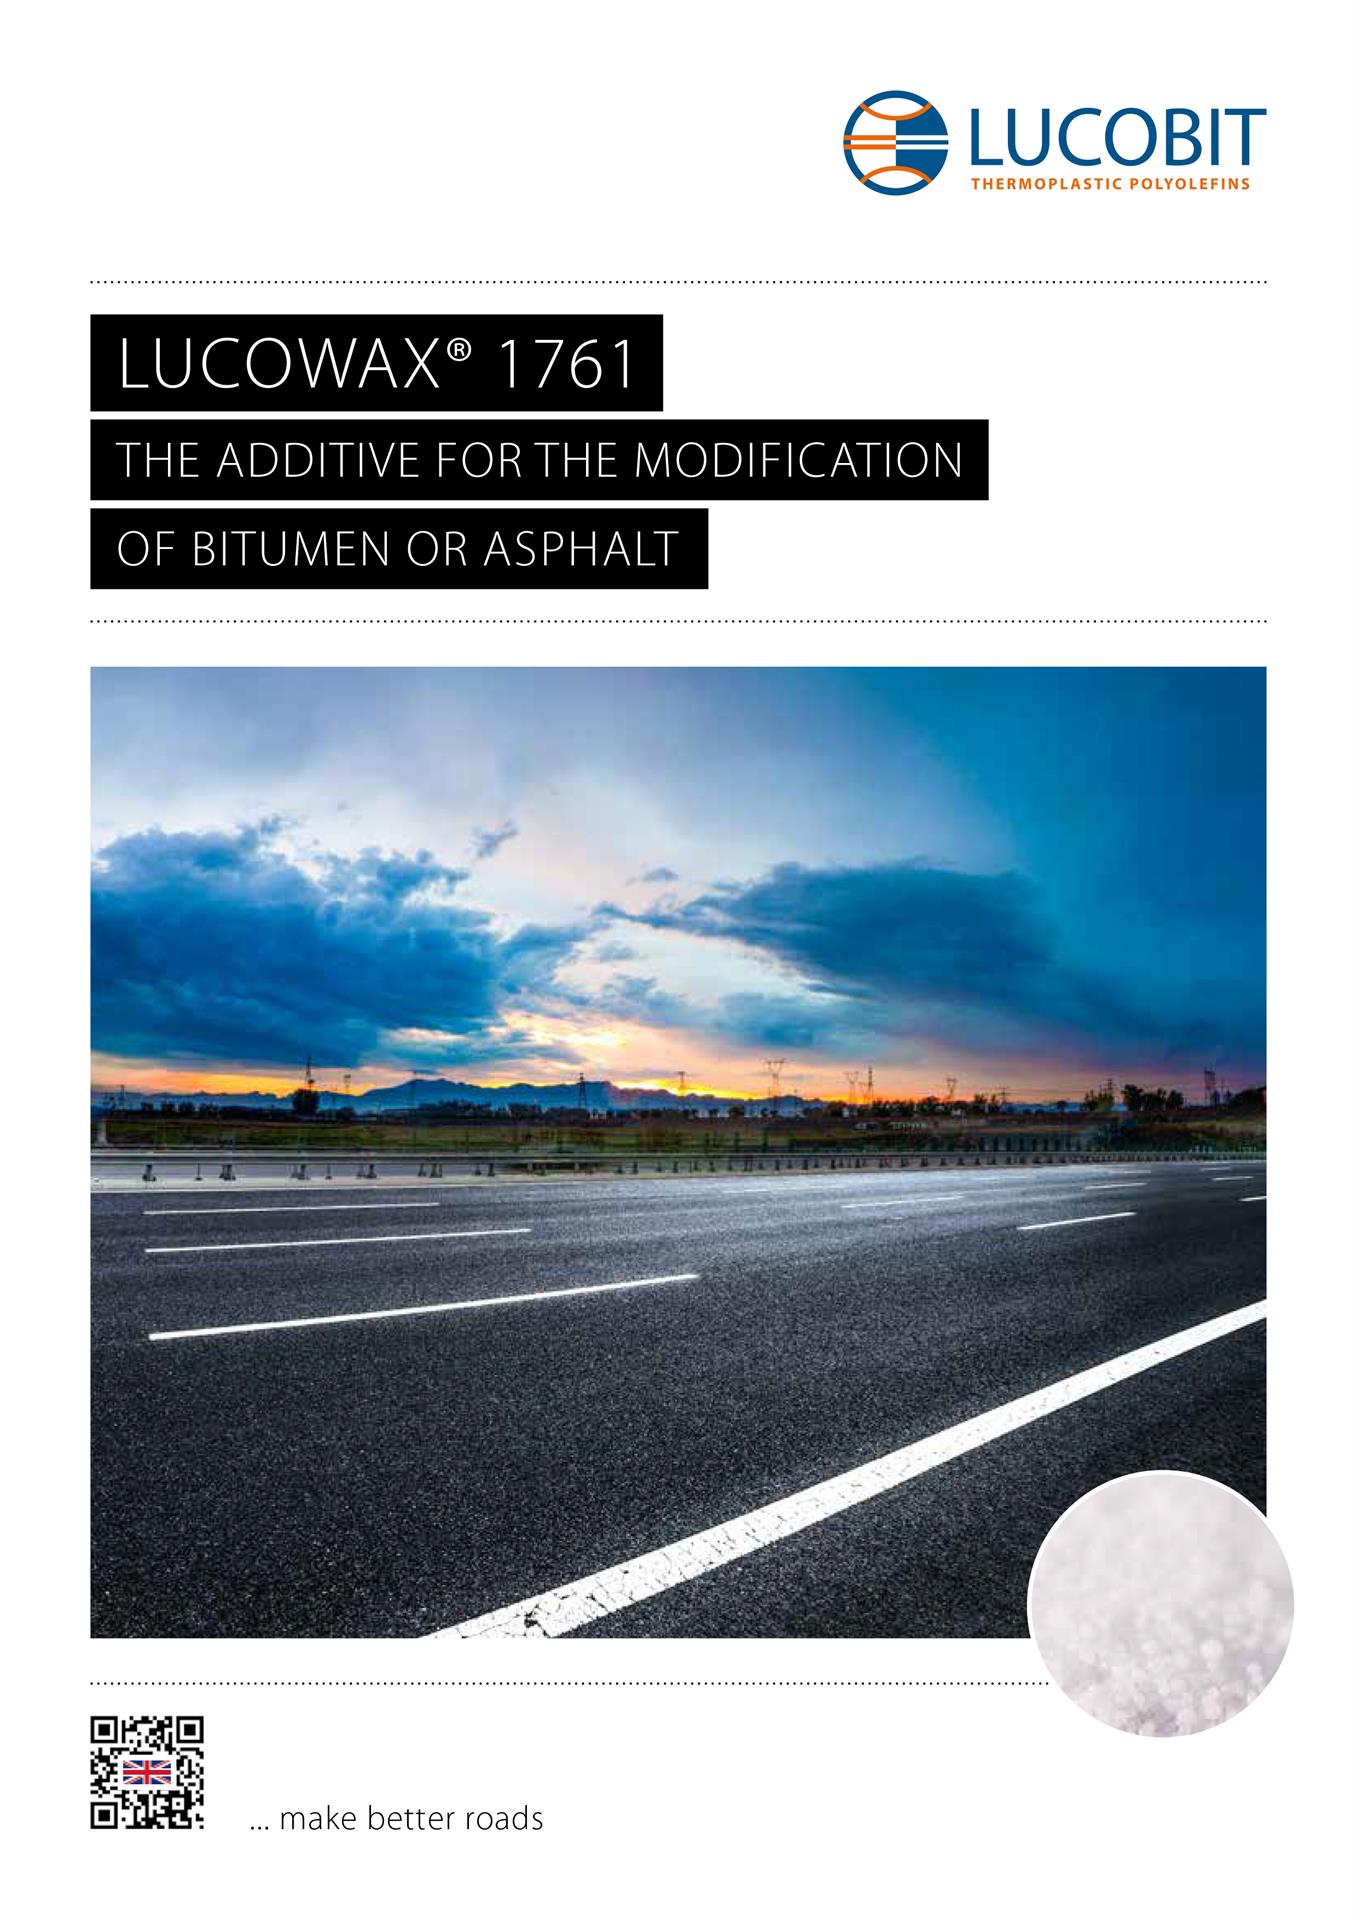 LUCOBIT Brochure - LUCOWAX 1761 THE ADDITIVE FOR THE MODIFICATION OF BITUMEN OR ASPHALT